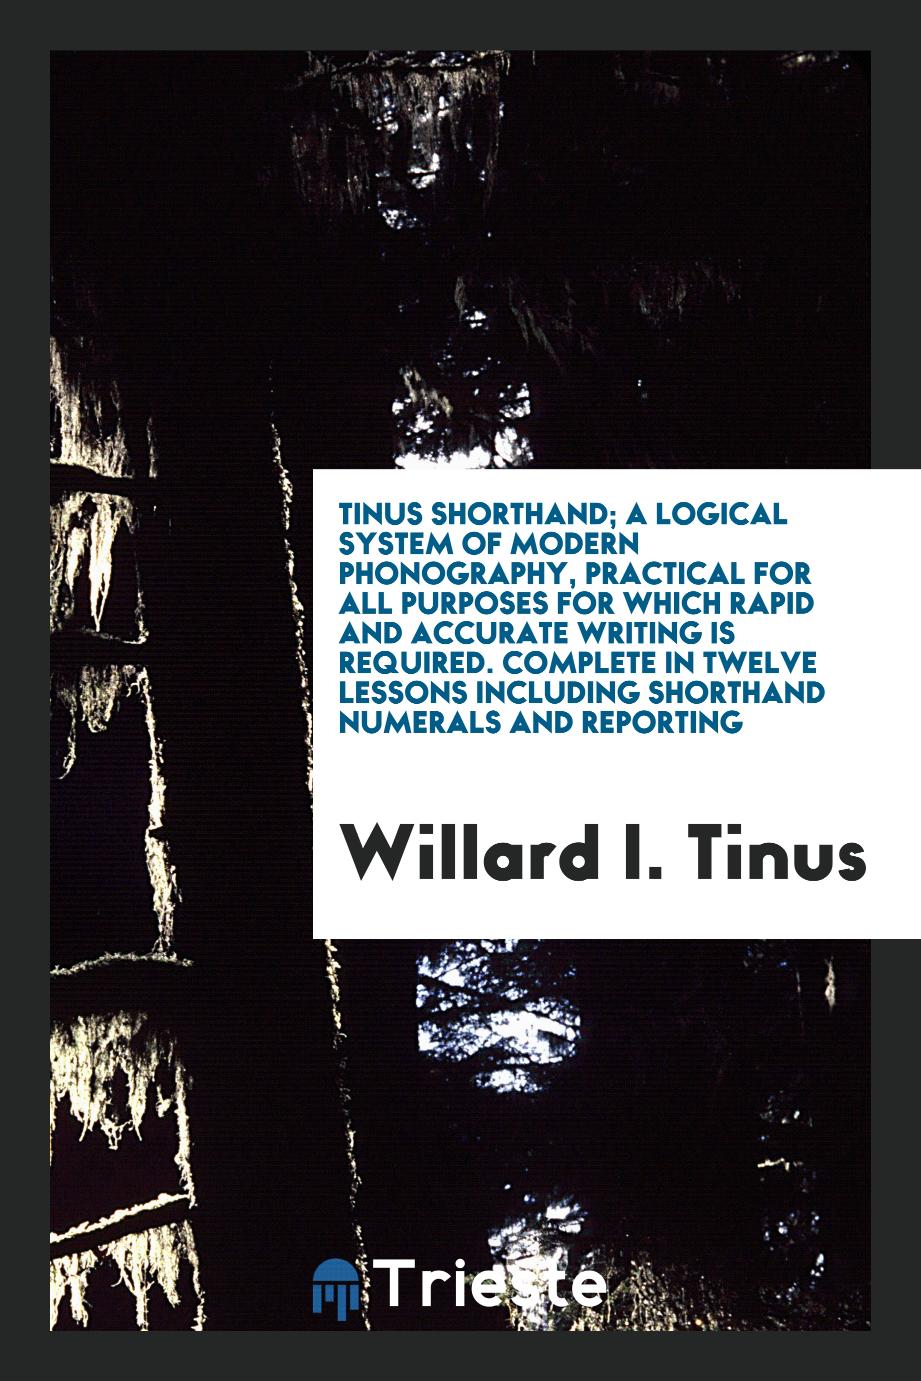 Tinus shorthand; a logical system of modern phonography, practical for all purposes for which rapid and accurate writing is required. Complete in twelve lessons including shorthand numerals and reporting